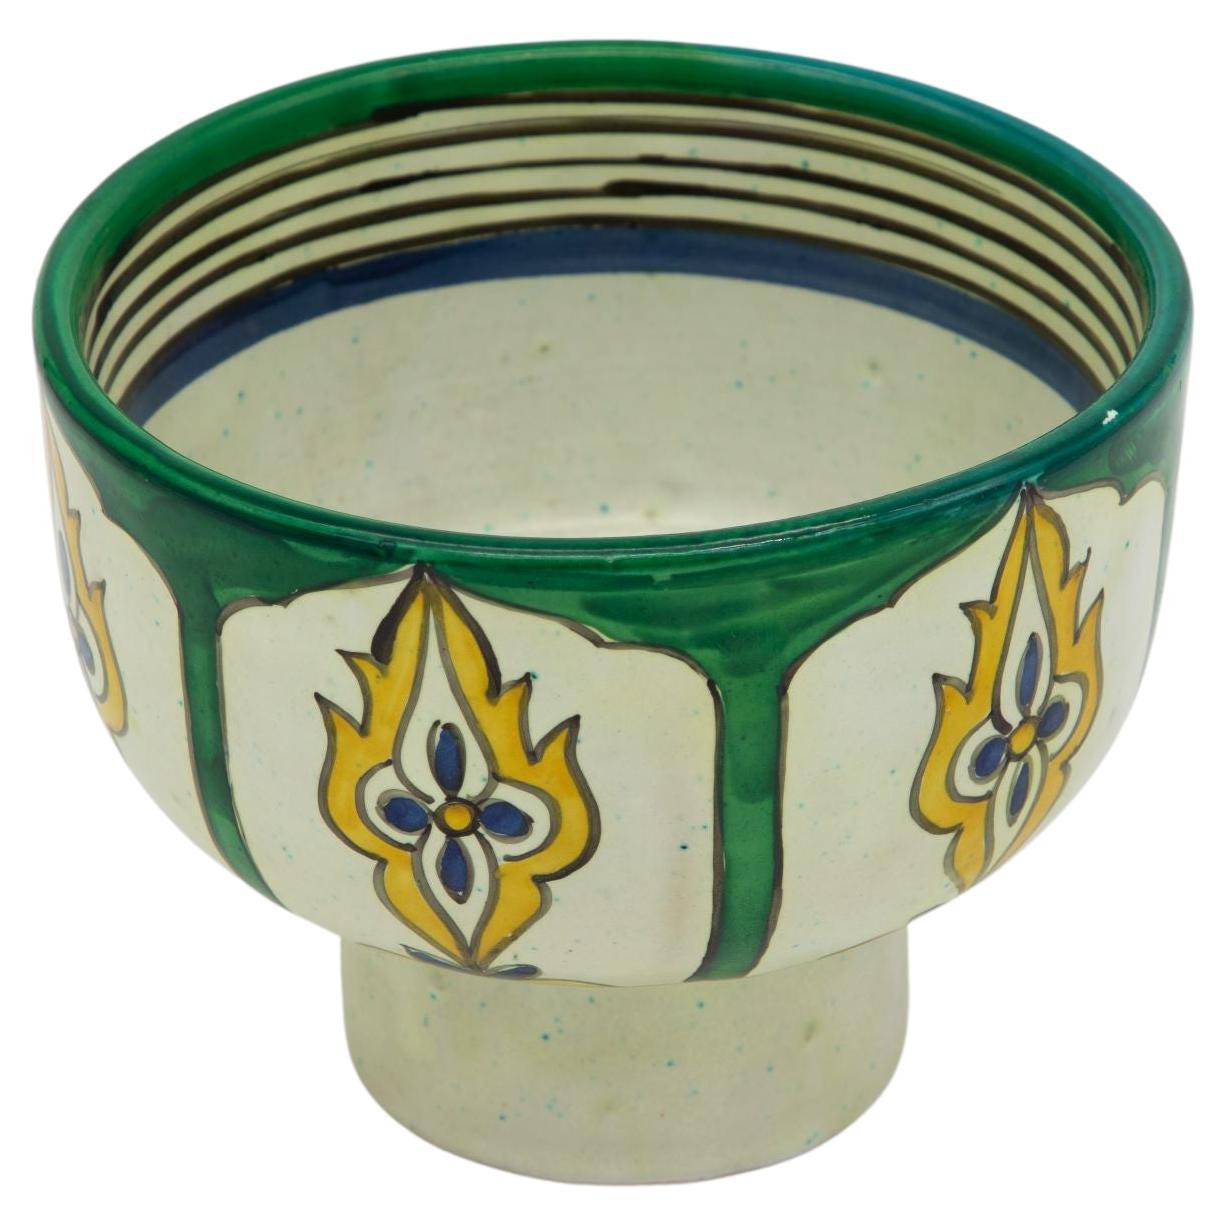 Emerald and Yellow Bowl